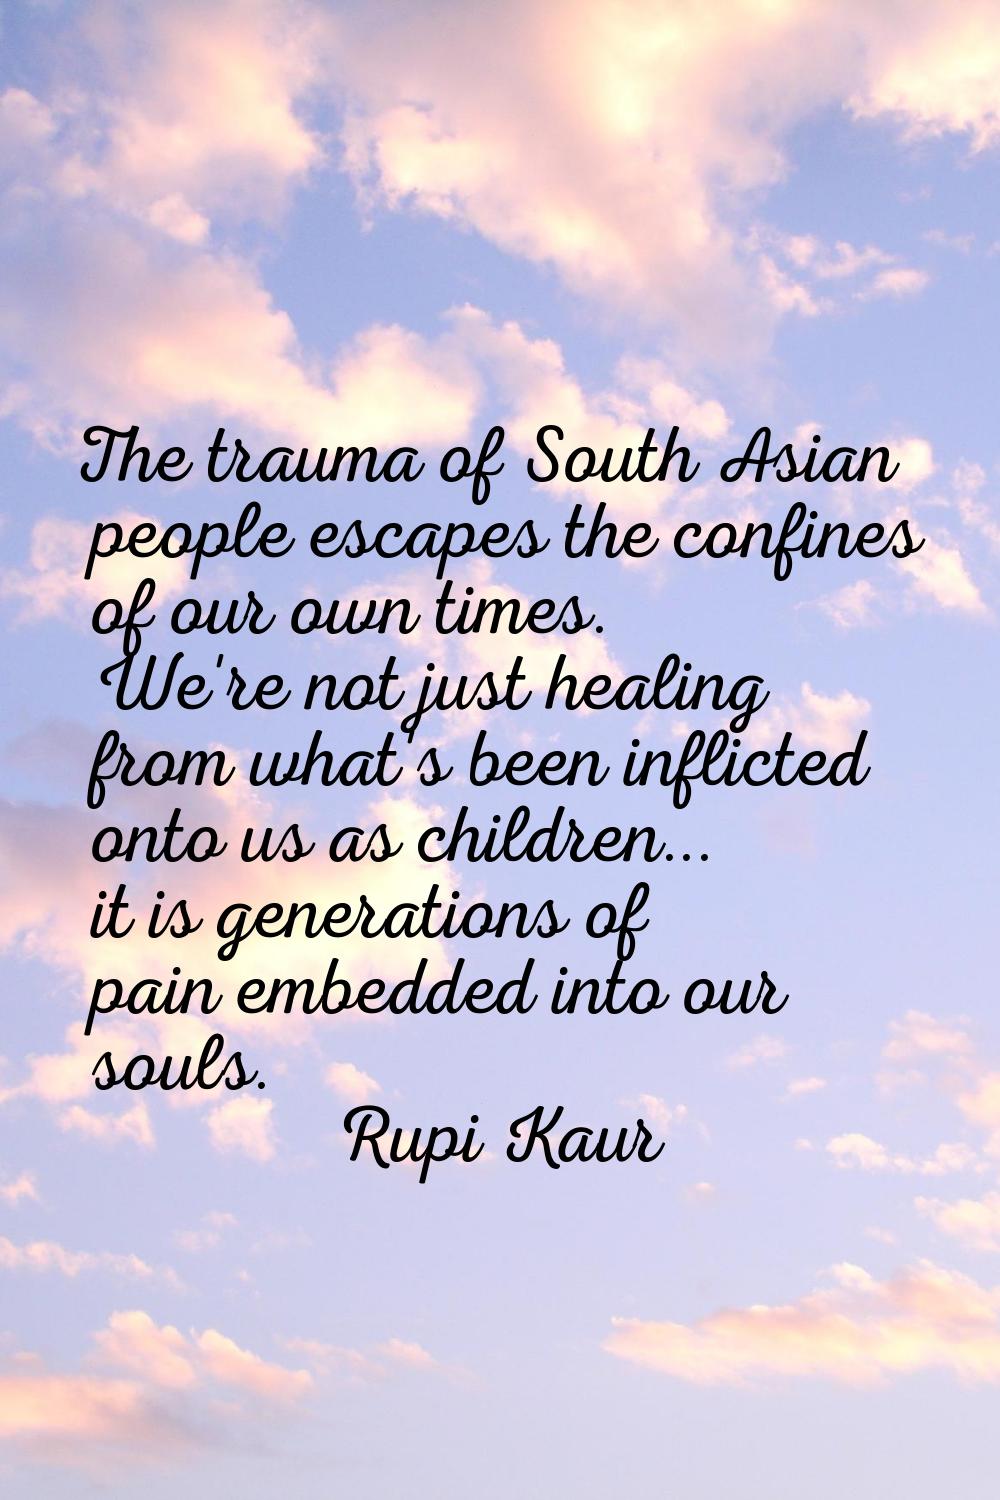 The trauma of South Asian people escapes the confines of our own times. We're not just healing from